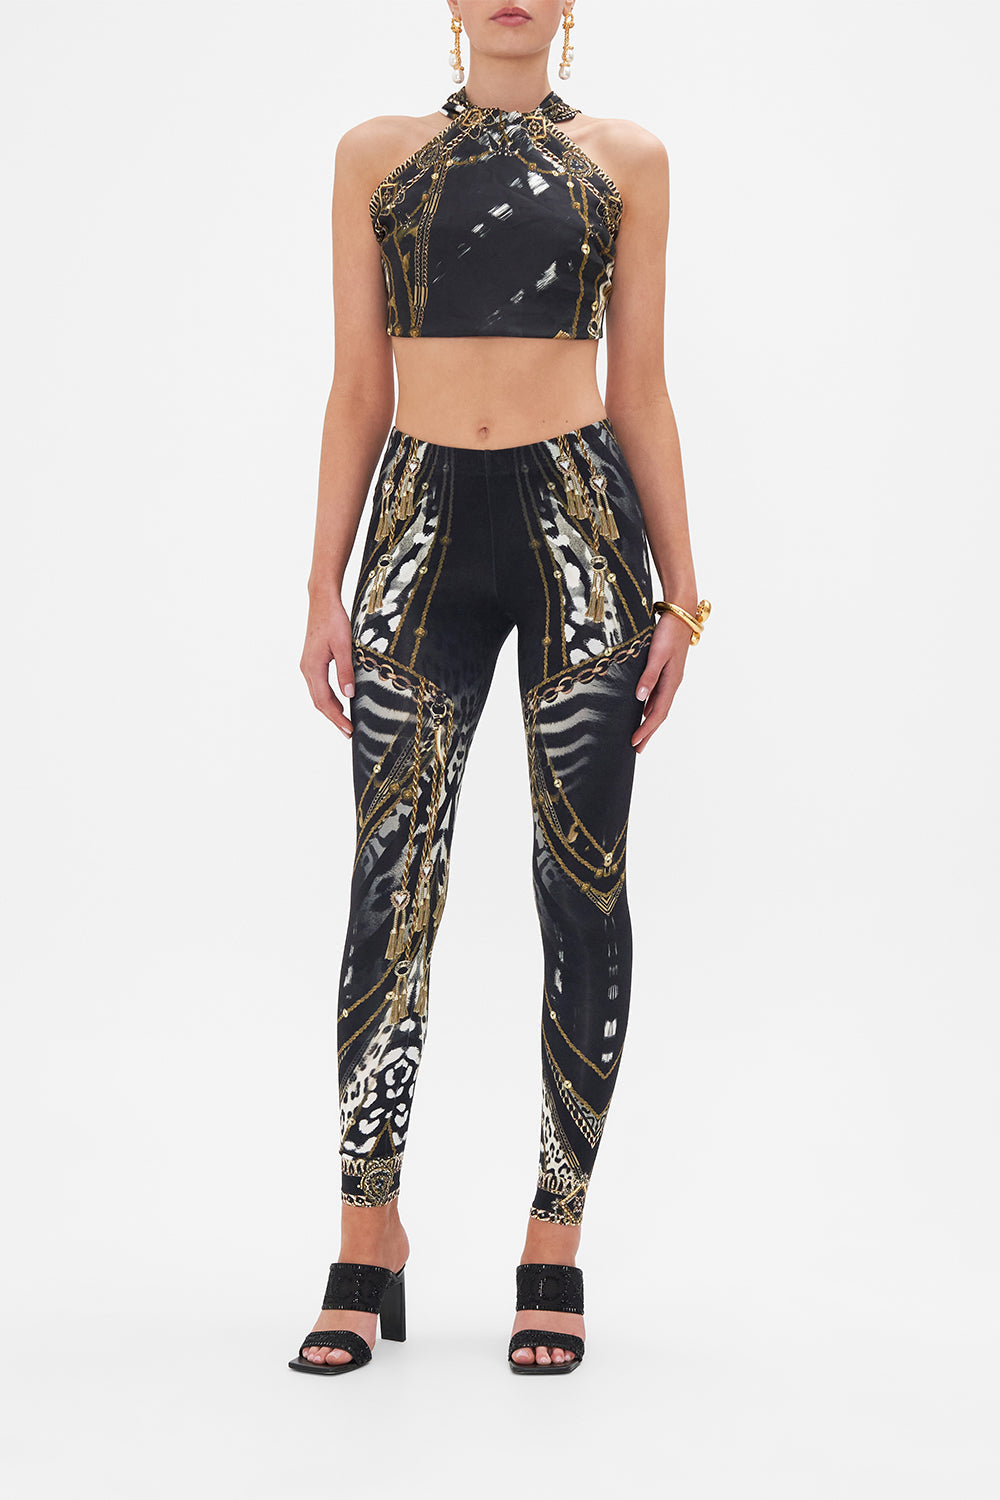 Front view of model wearing CAMILLA black and white animal print leggings in Untamed Royalty print